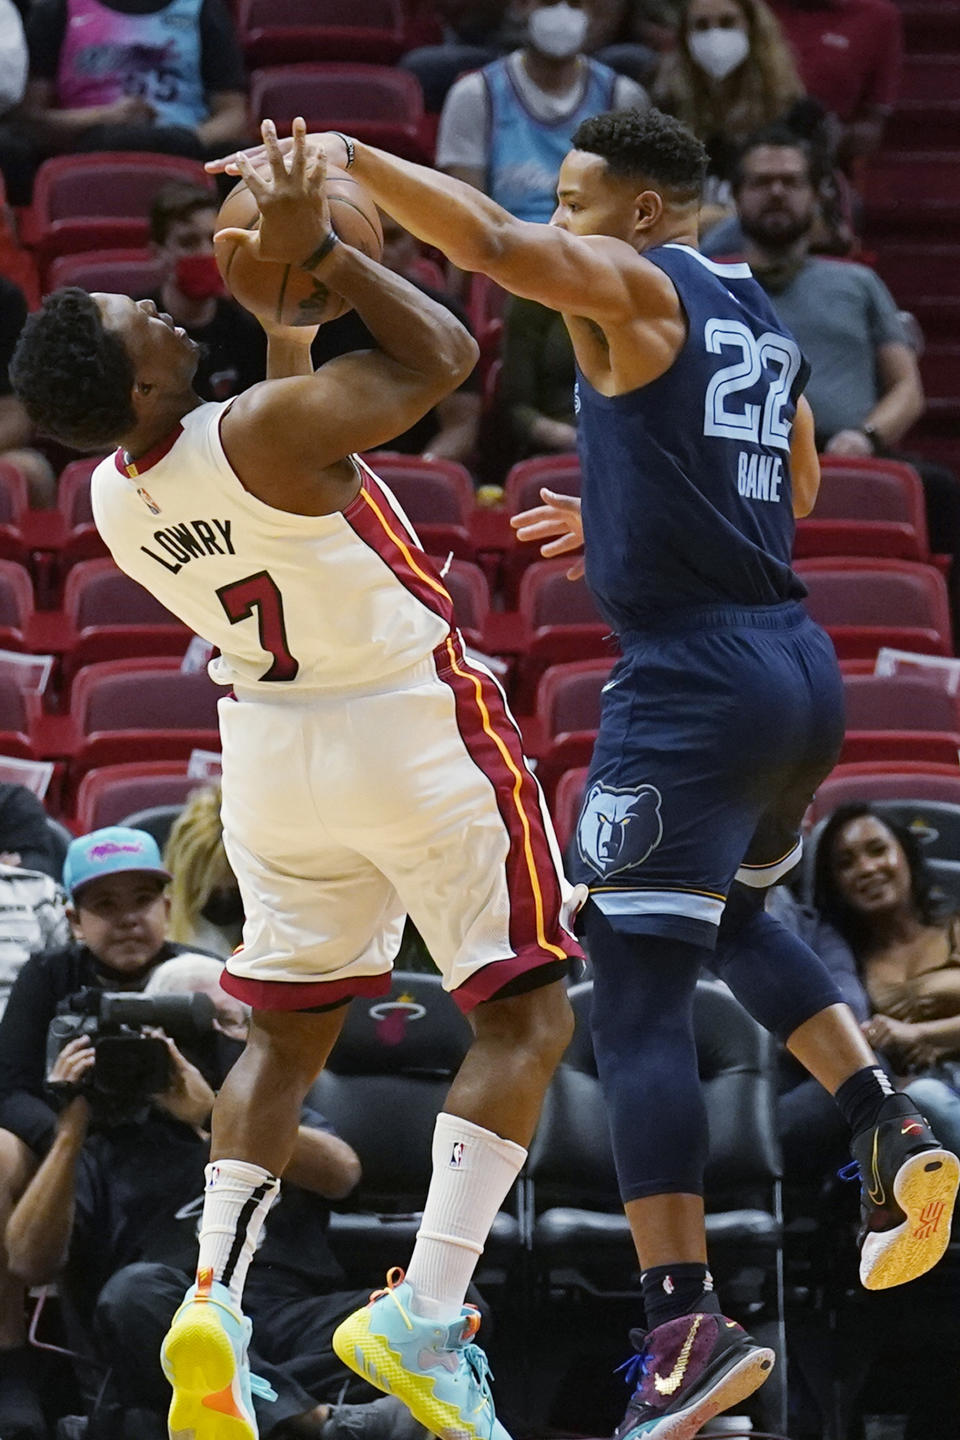 Memphis Grizzlies guard Desmond Bane (22) blocks a shot to the basket by Miami Heat guard Kyle Lowry (7) during the first half of an NBA basketball game, Monday, Dec. 6, 2021, in Miami. (AP Photo/Marta Lavandier)